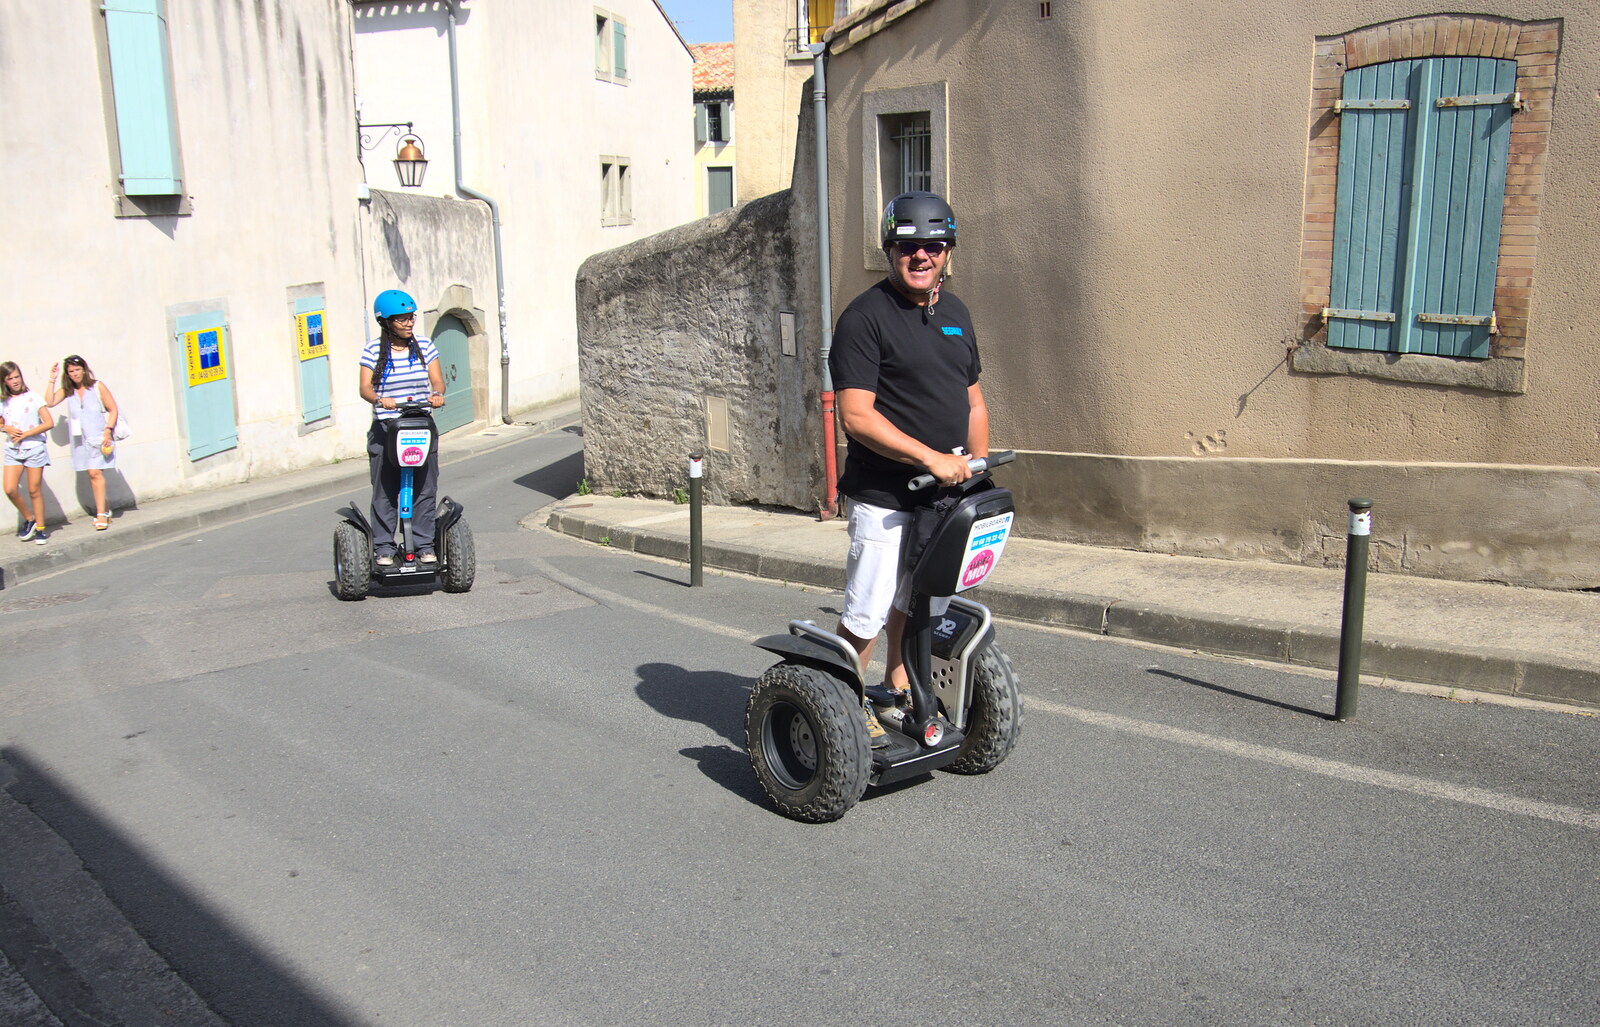 Some Segways roll around from A Trip to Carcassonne, Aude, France - 8th August 2018